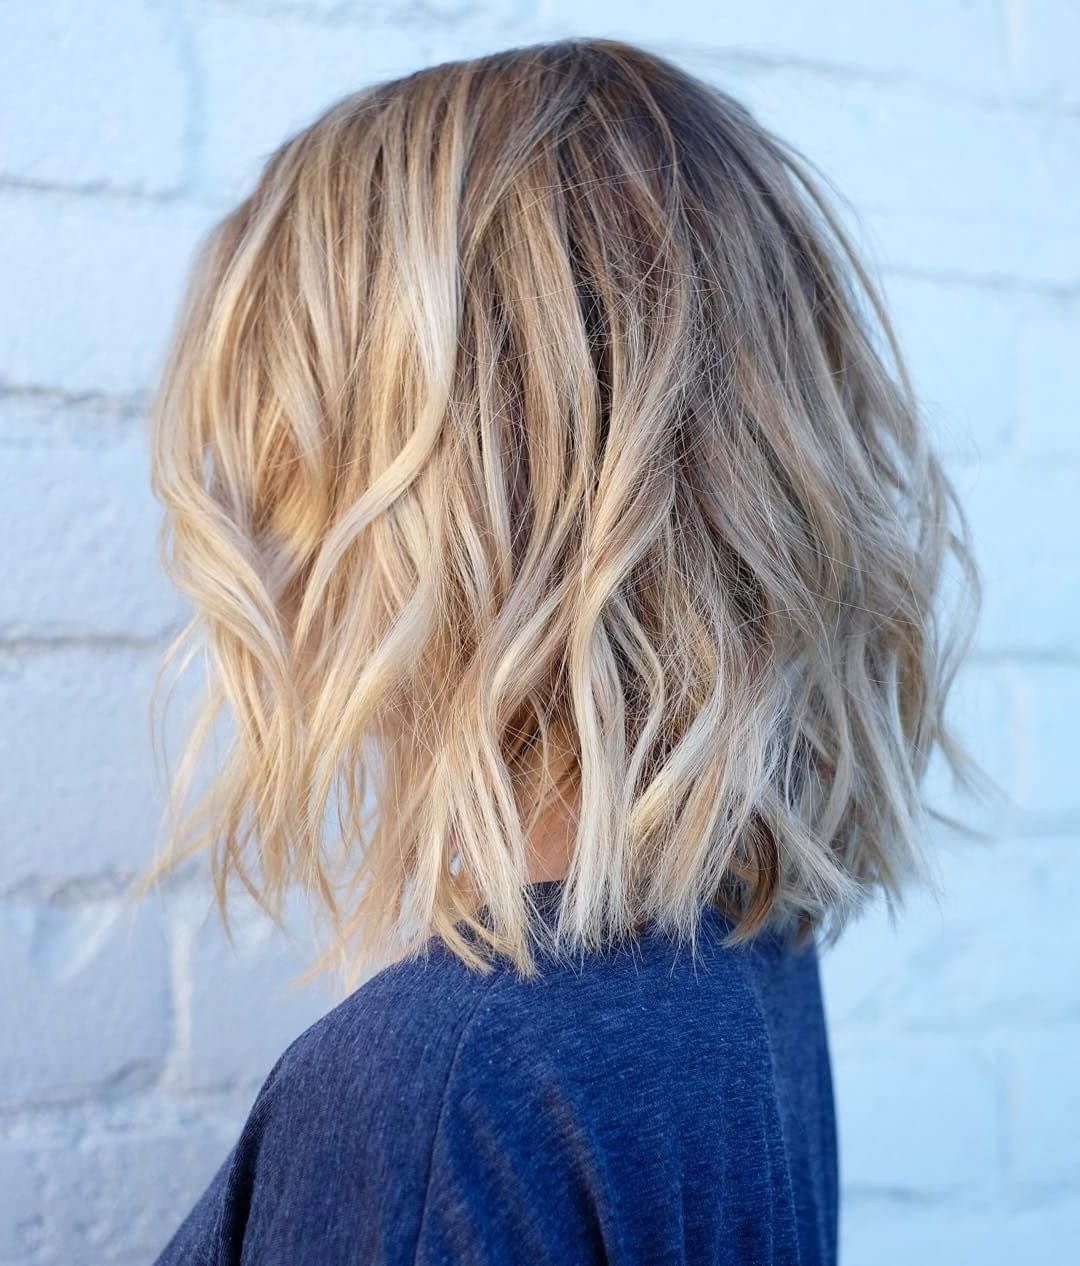 50 Fresh Short Blonde Hair Ideas To Update Your Style In 2018 Within Preferred Cool Dirty Blonde Balayage Hairstyles (View 13 of 20)